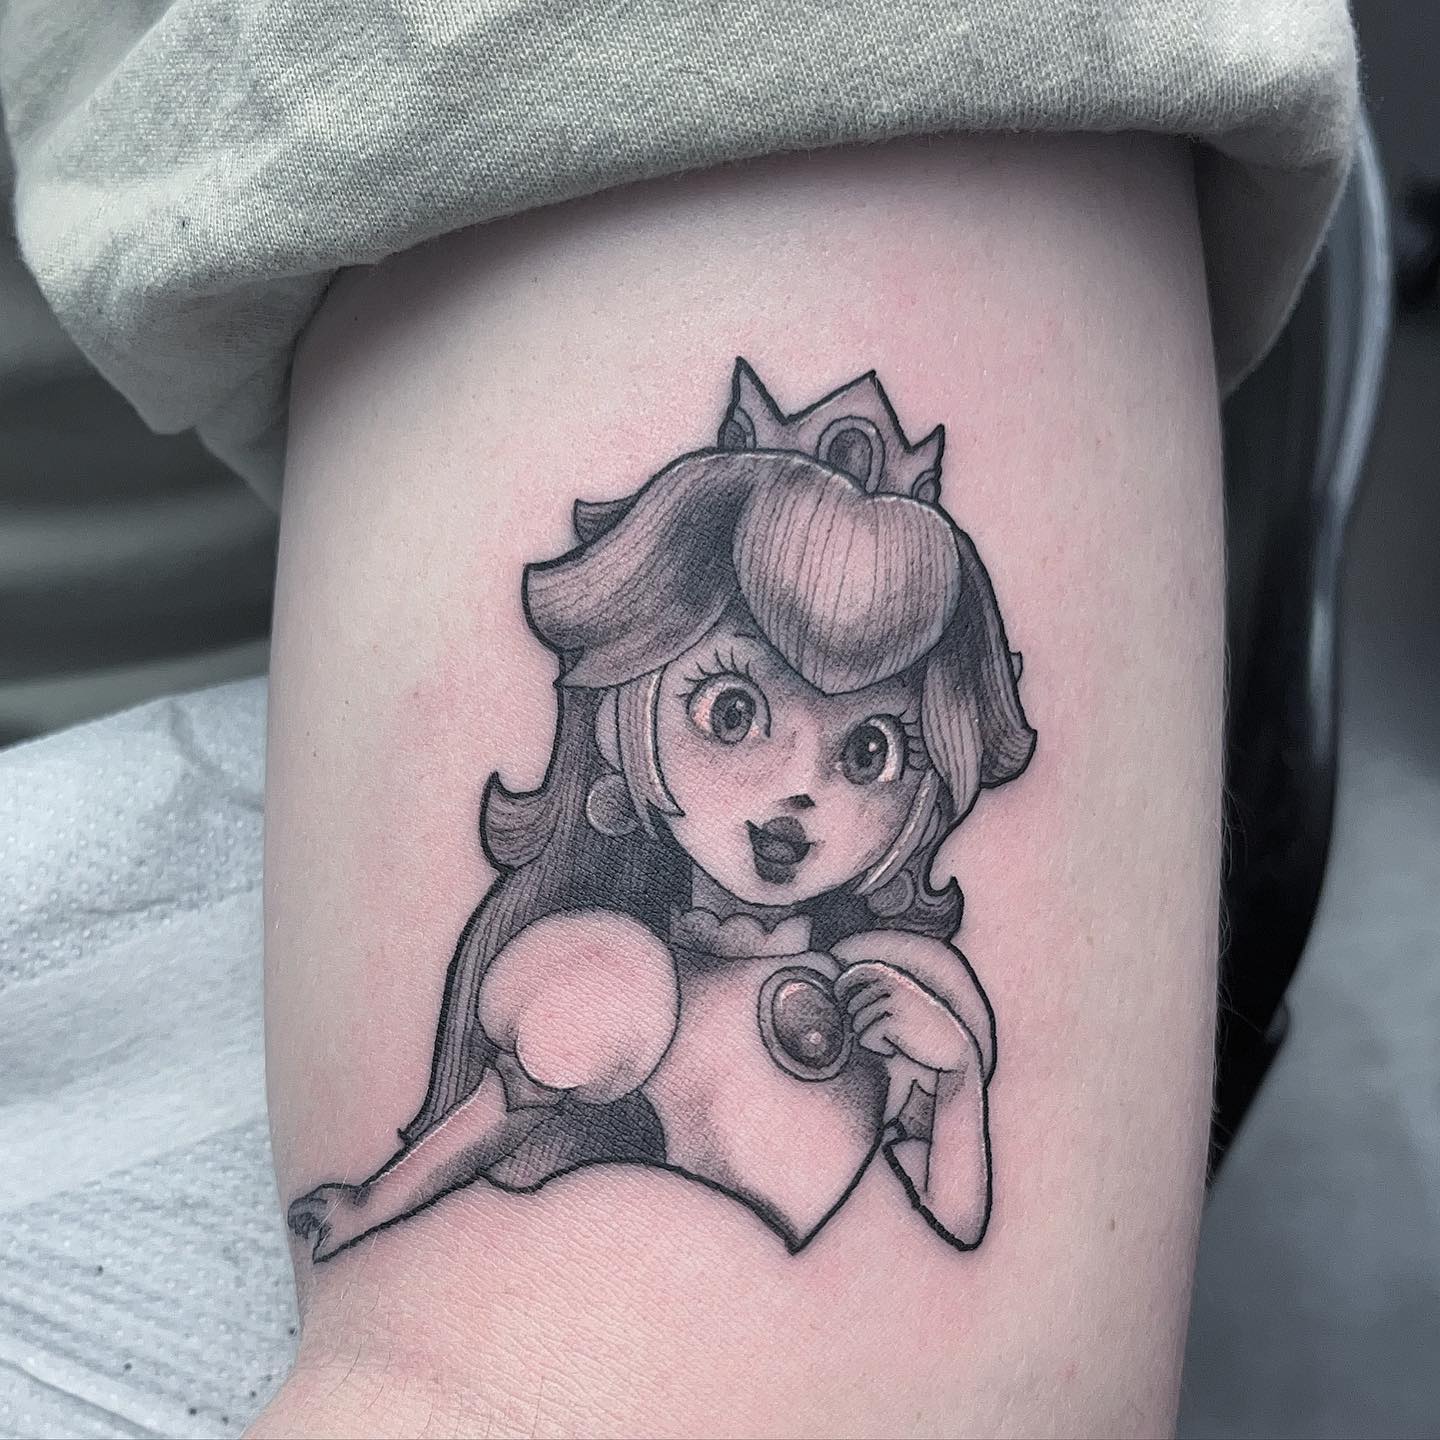 Added Princess Peach to Ryan’s growing collection. Always fun to work on your ideas! 

                     